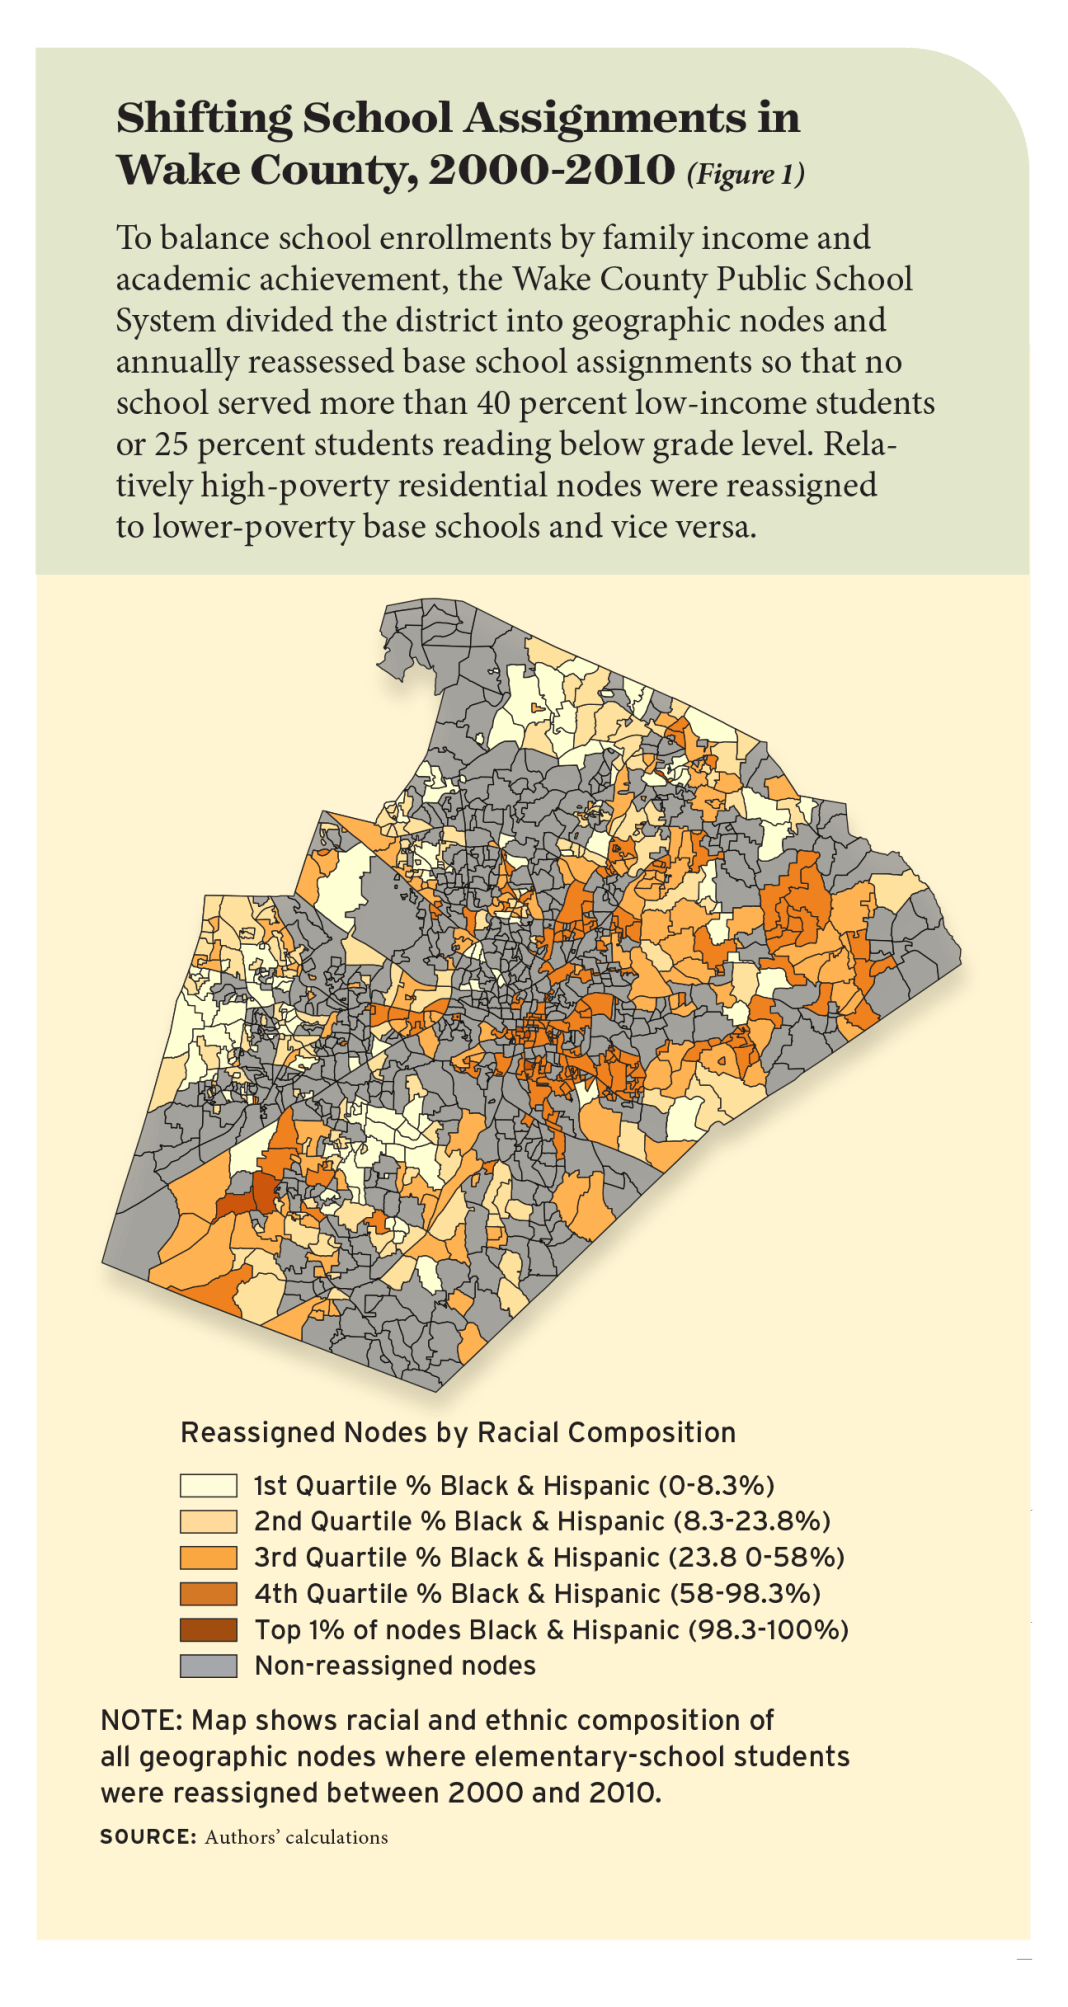 Shifting School Assignments in Wake County, 2000-2010 (Figure 1)